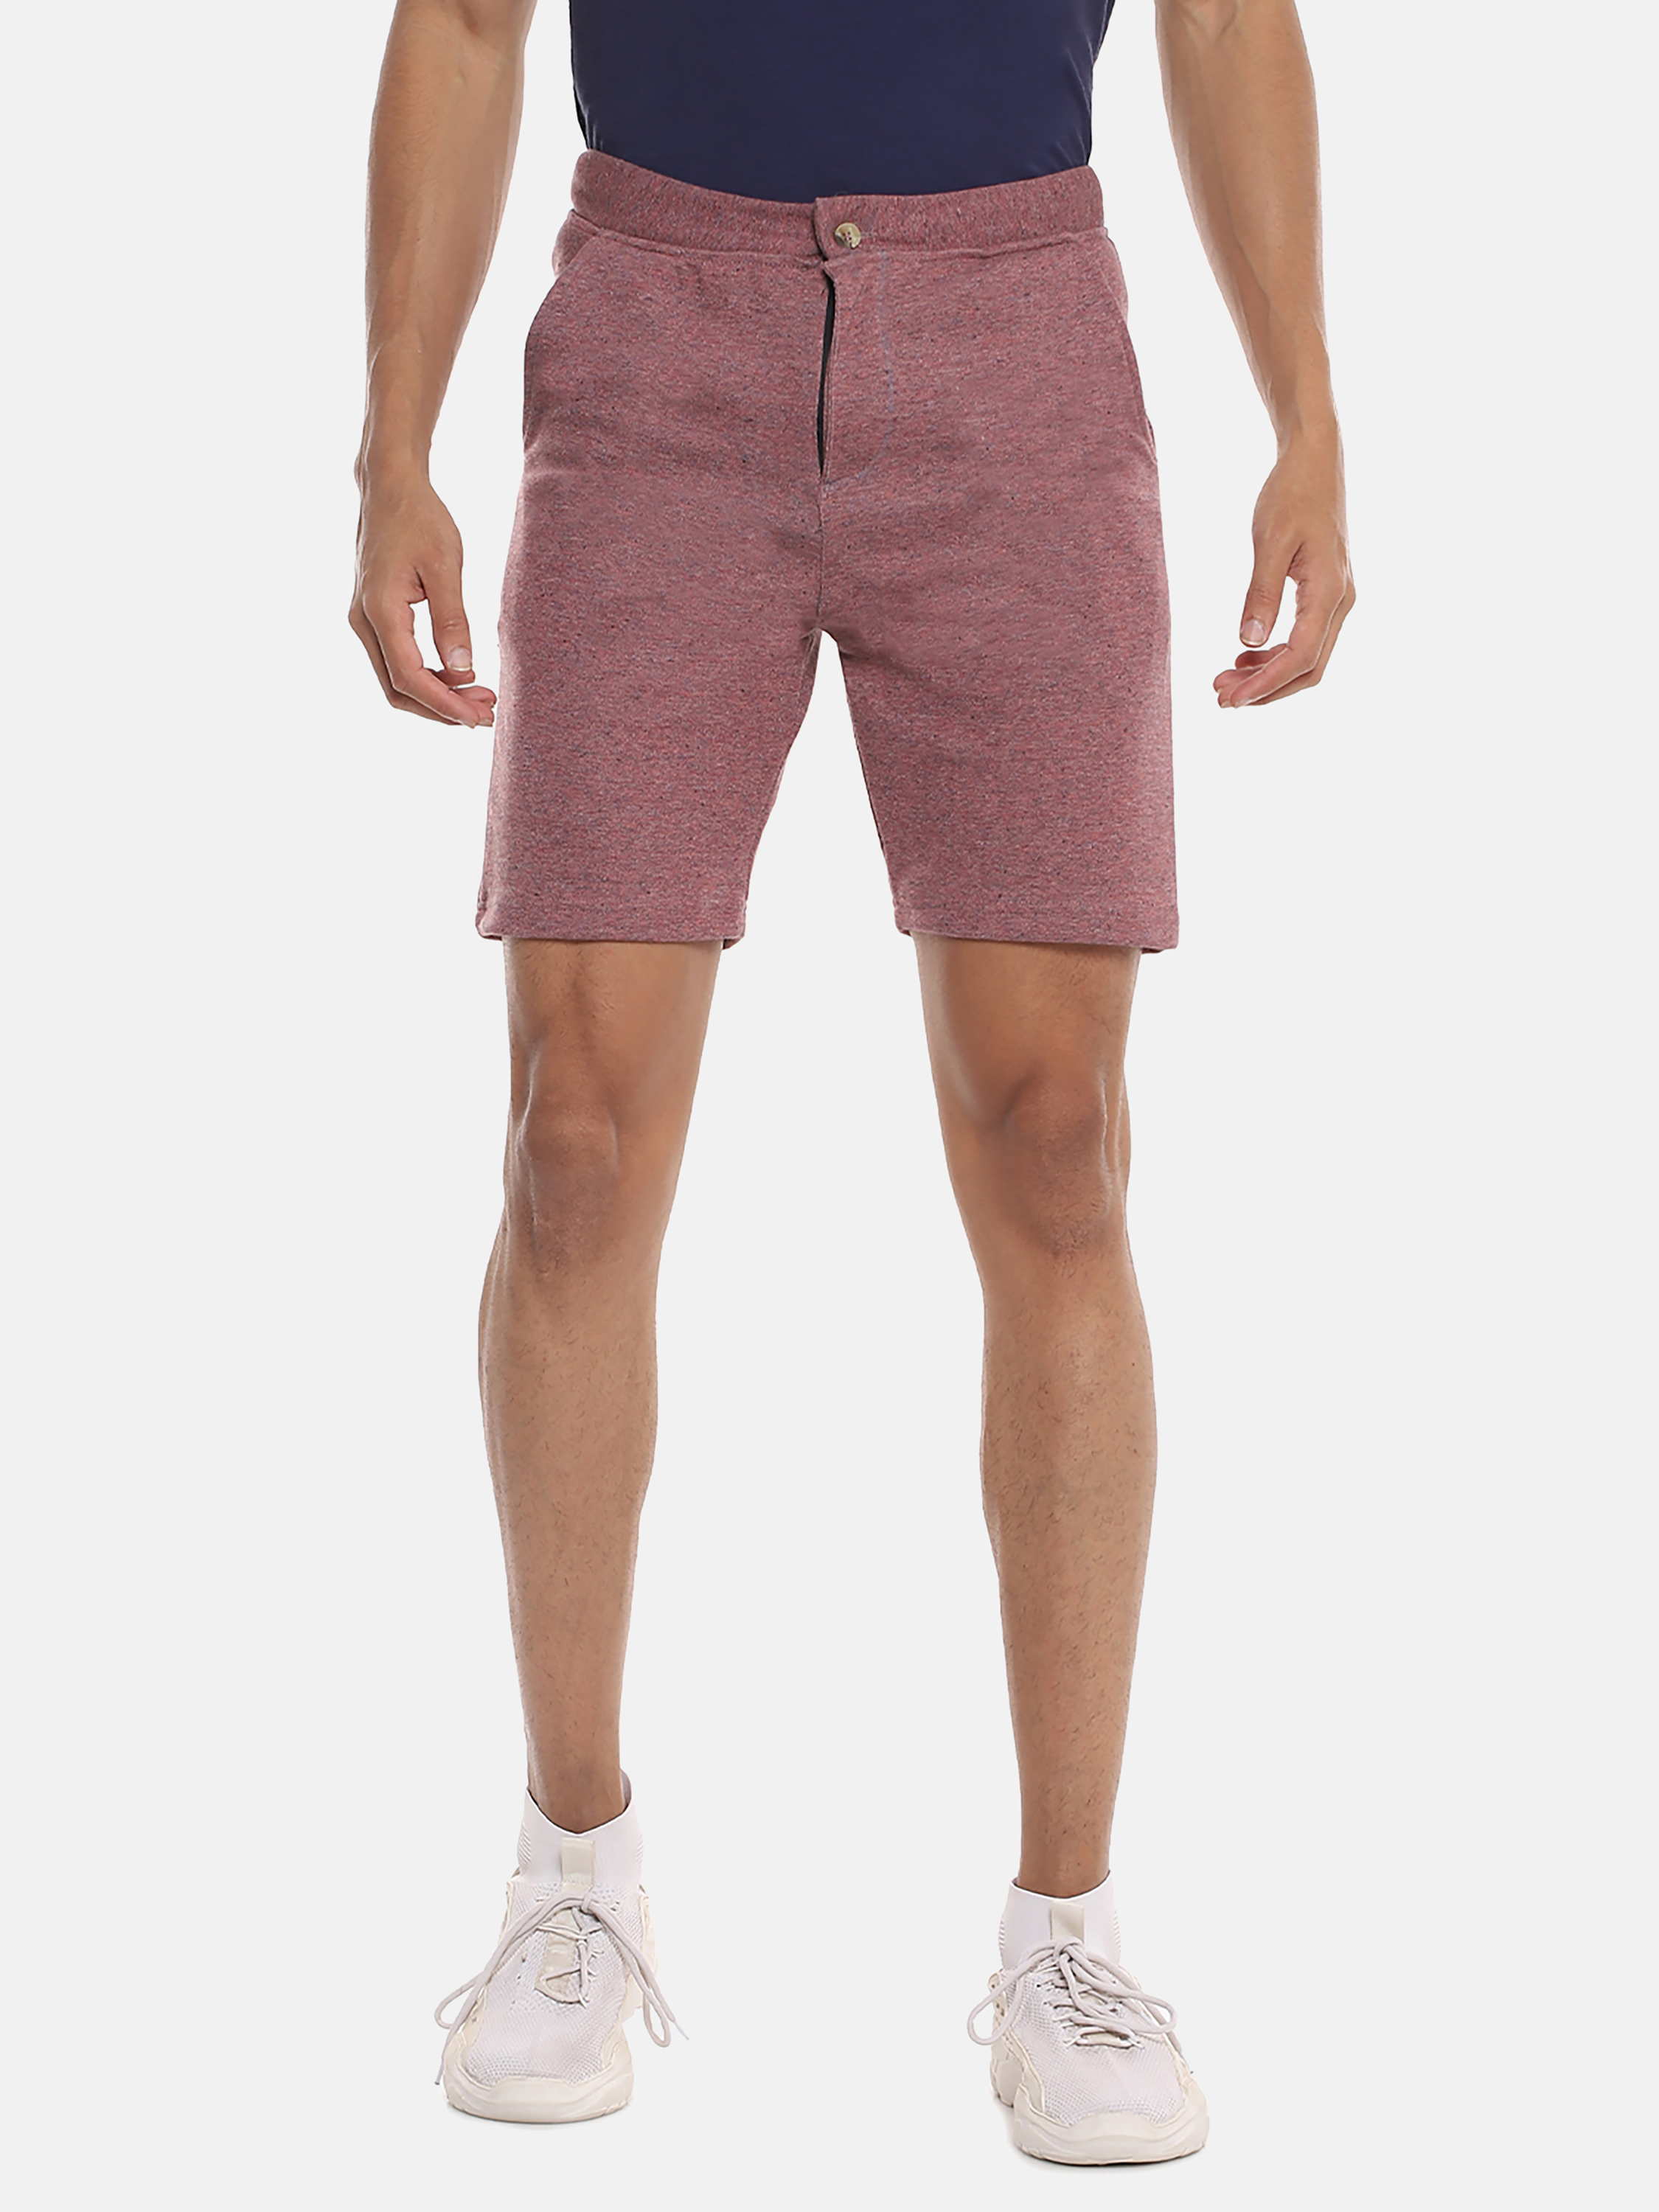 Solid Stylish Casual & Active Shorts